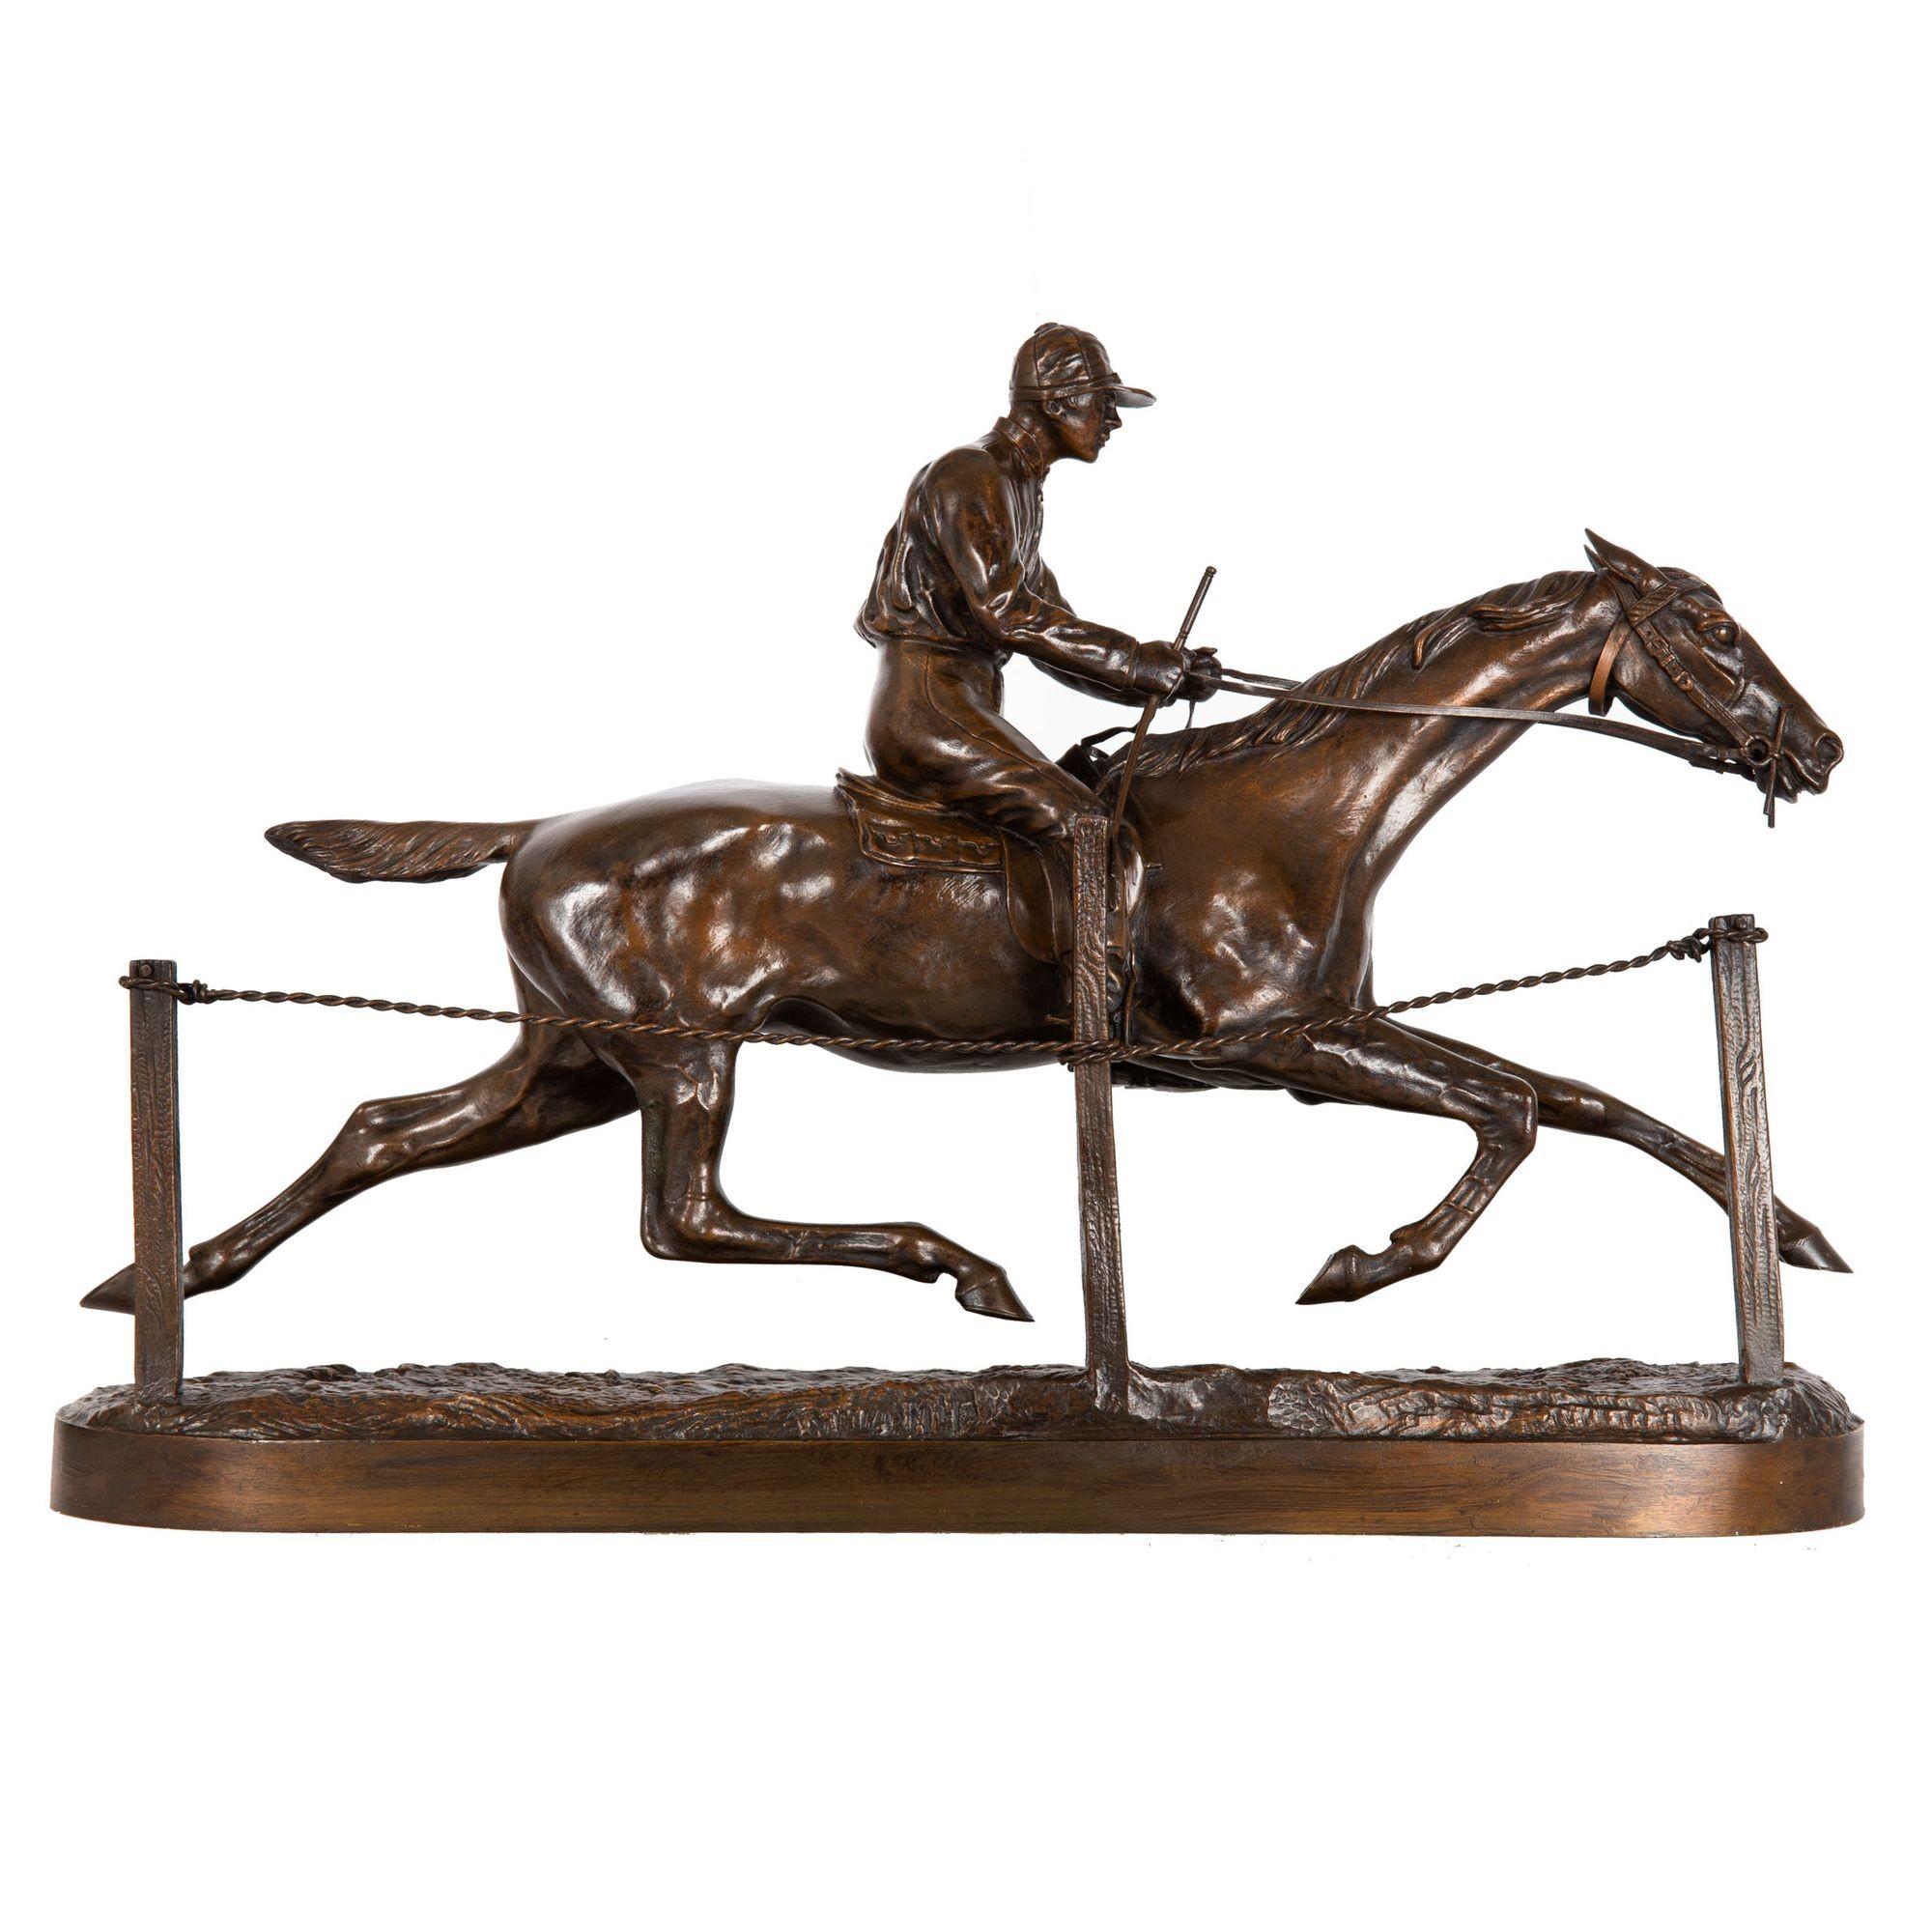 H.R. DE VAINS
French, 1848 - 1886

Jockey on a Race Horse

Patinated bronze  signed in base 